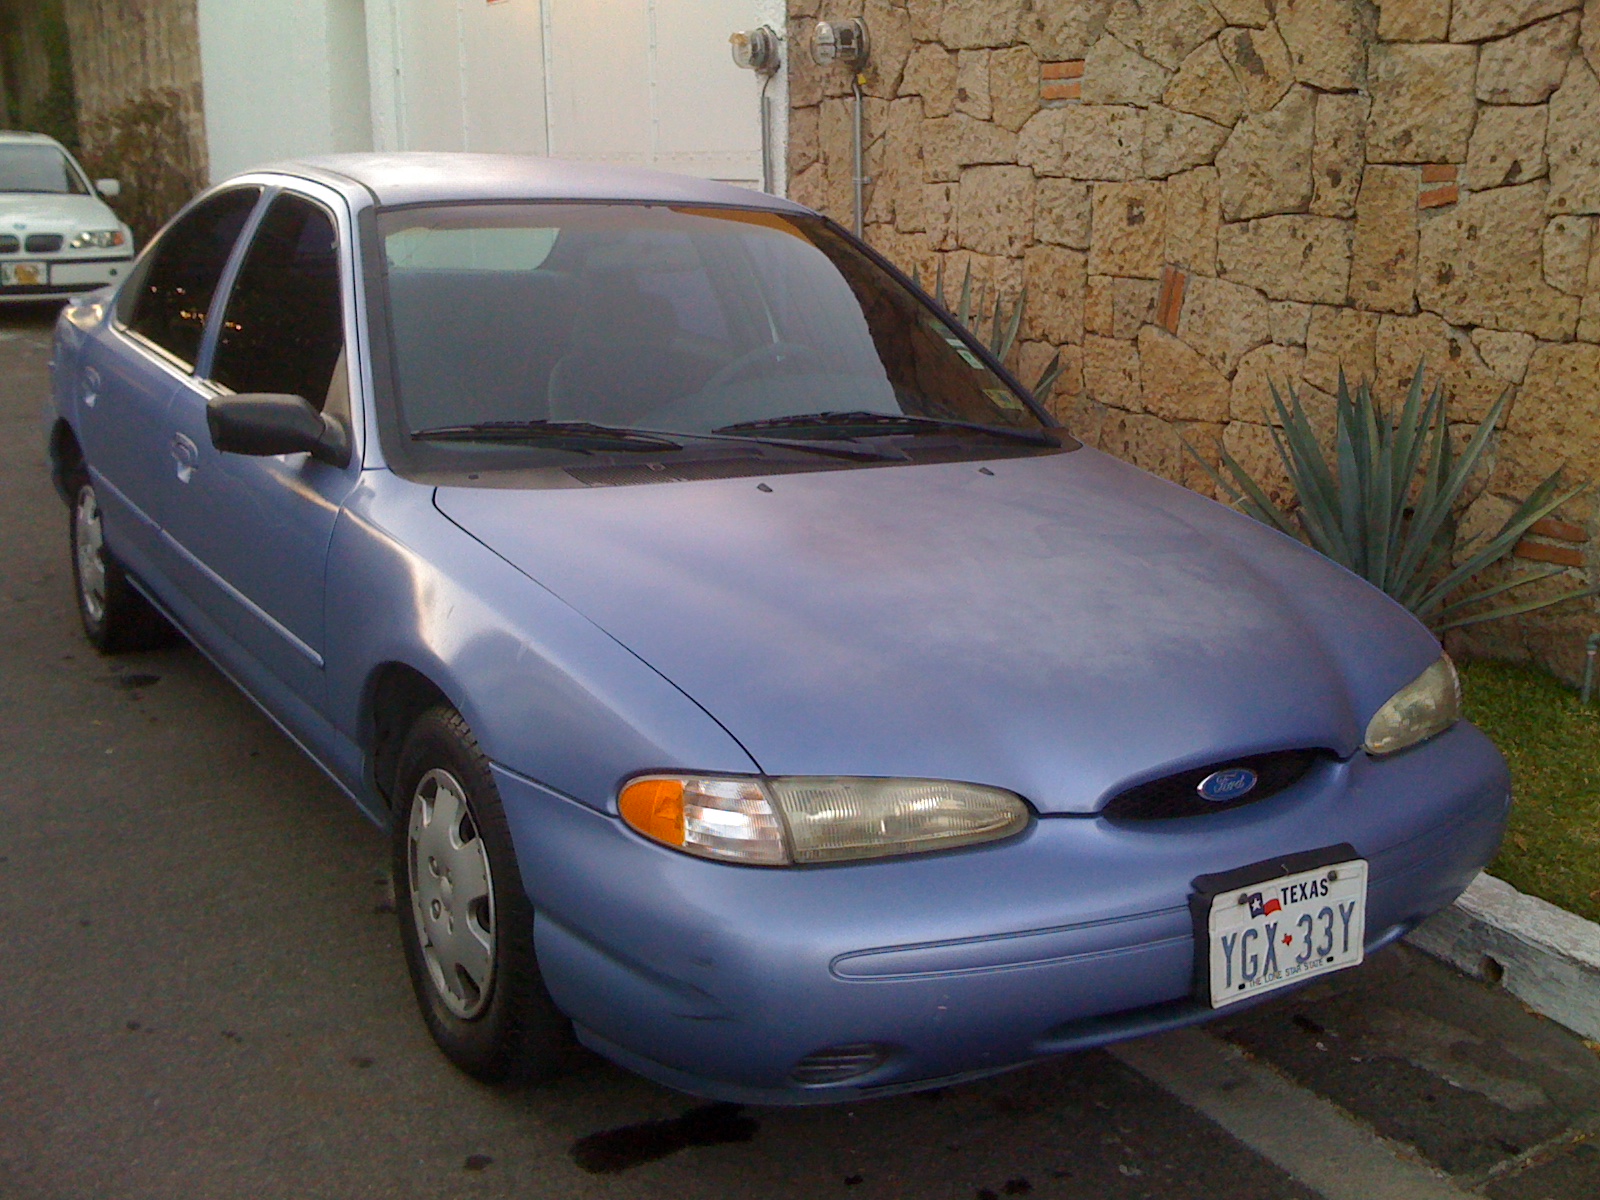 Ford Contour GL